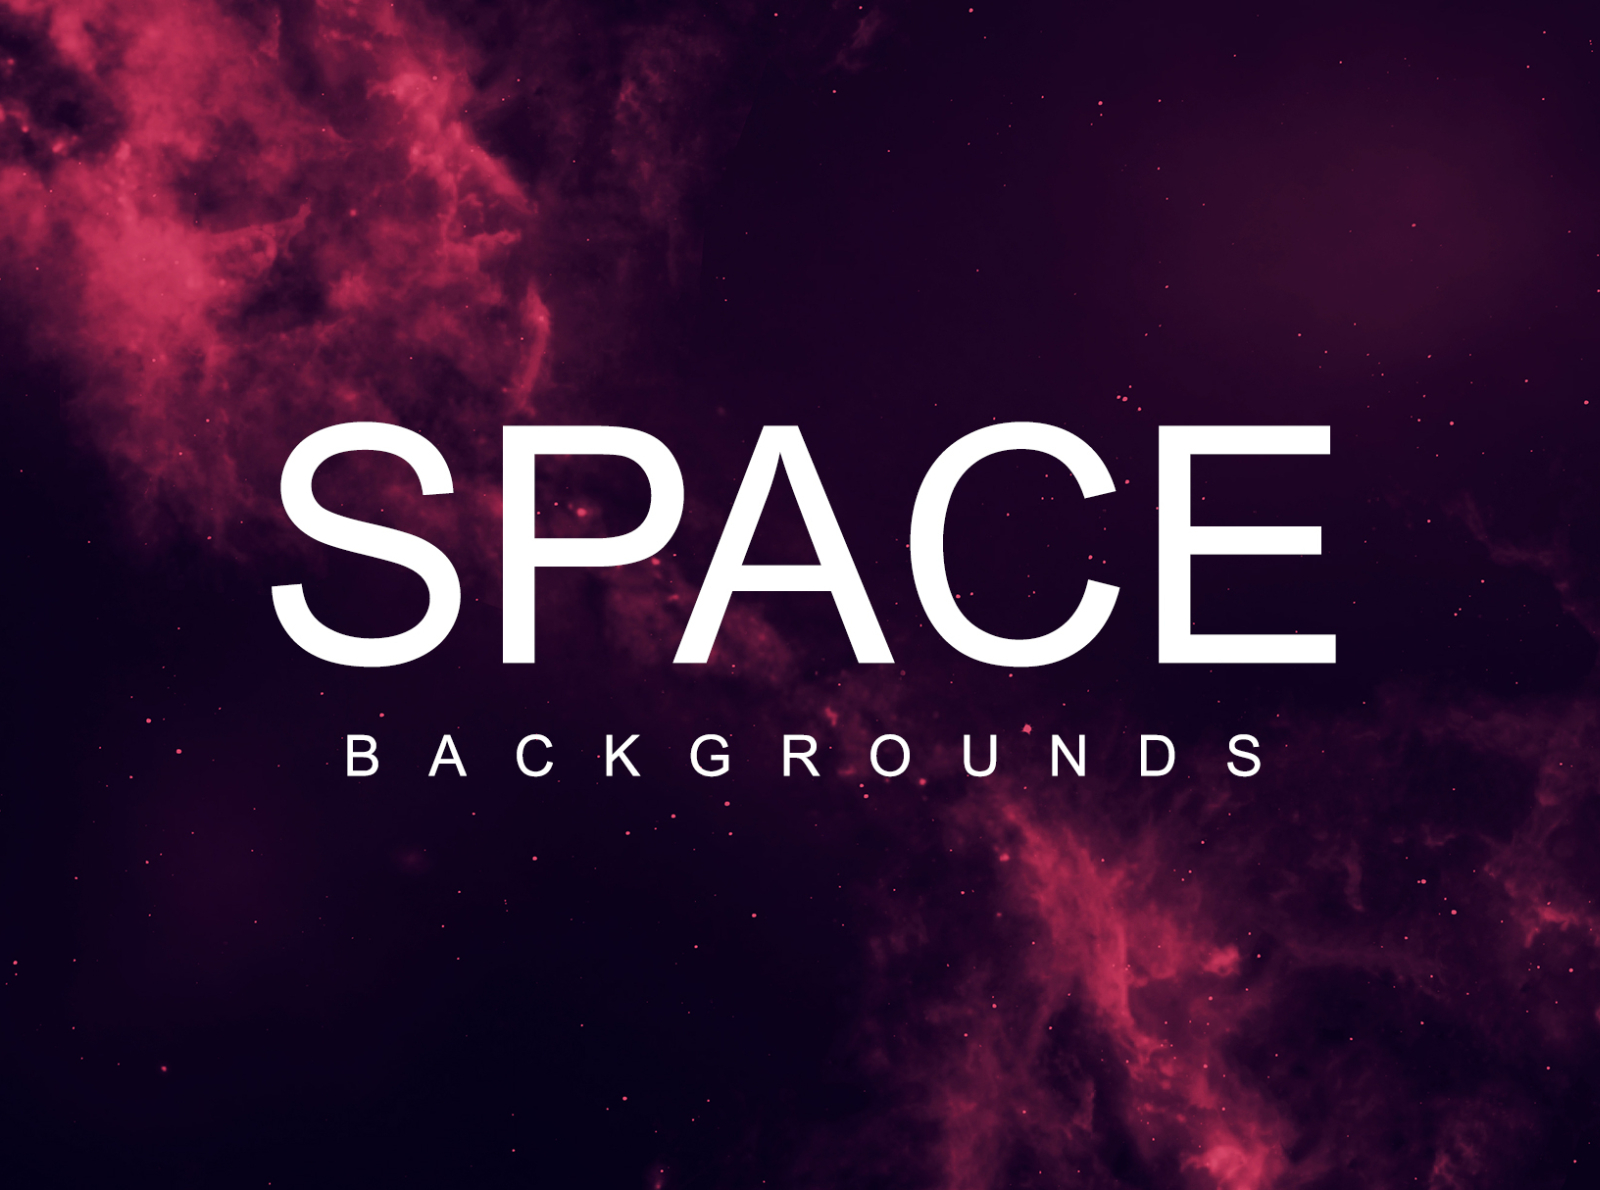 Space backgrounds by Pixthor on Dribbble